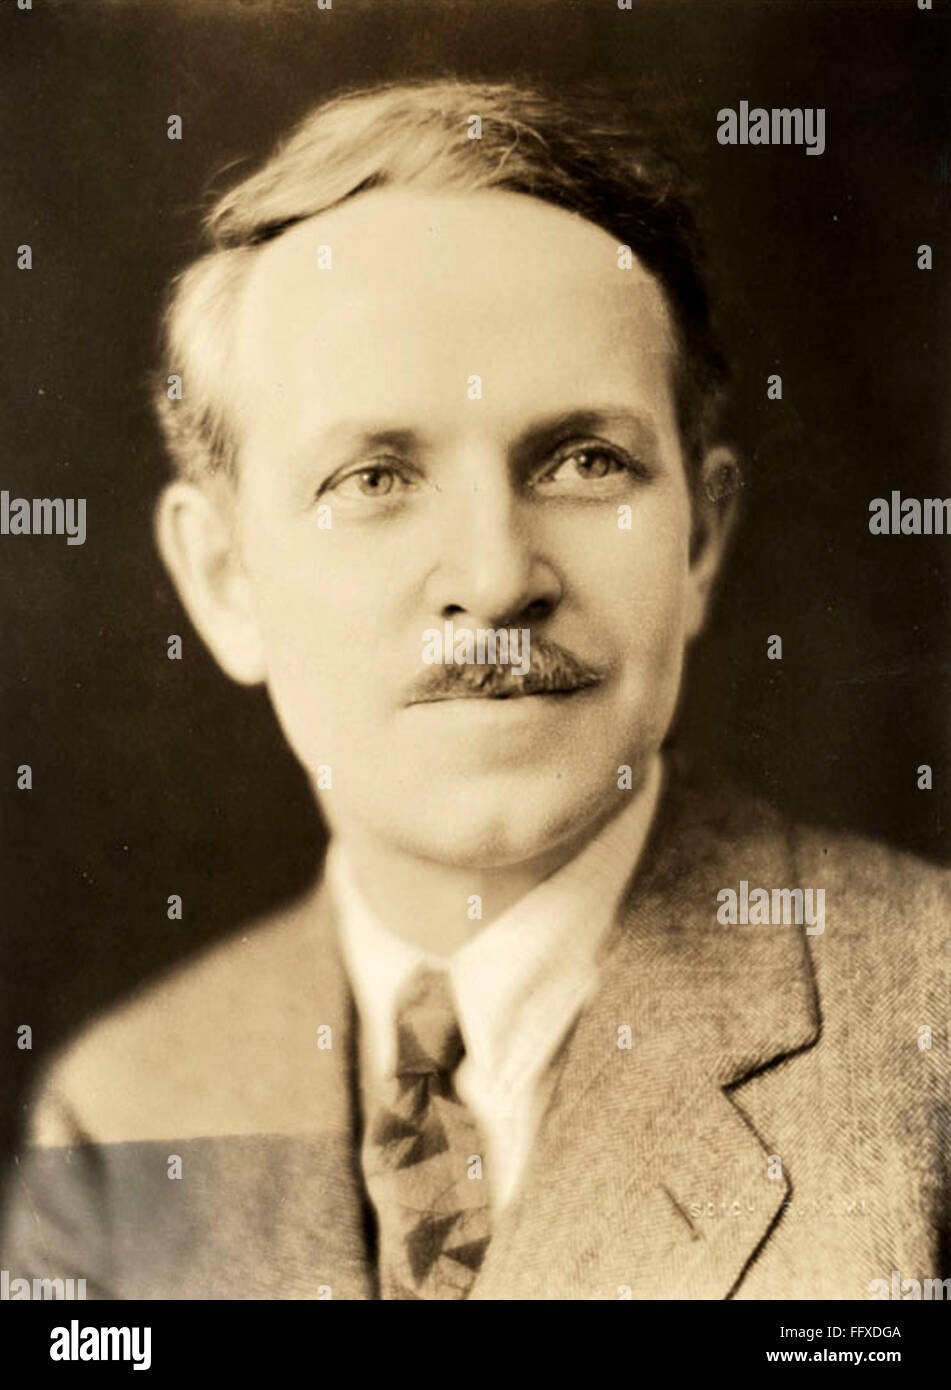 HOLGER CAHILL (1887-1960). /nAmerican (Icelandic-born) art administrator, museum curator, art critic, and writer. Photographed by Soichi Sunami, c1930. Stock Photo